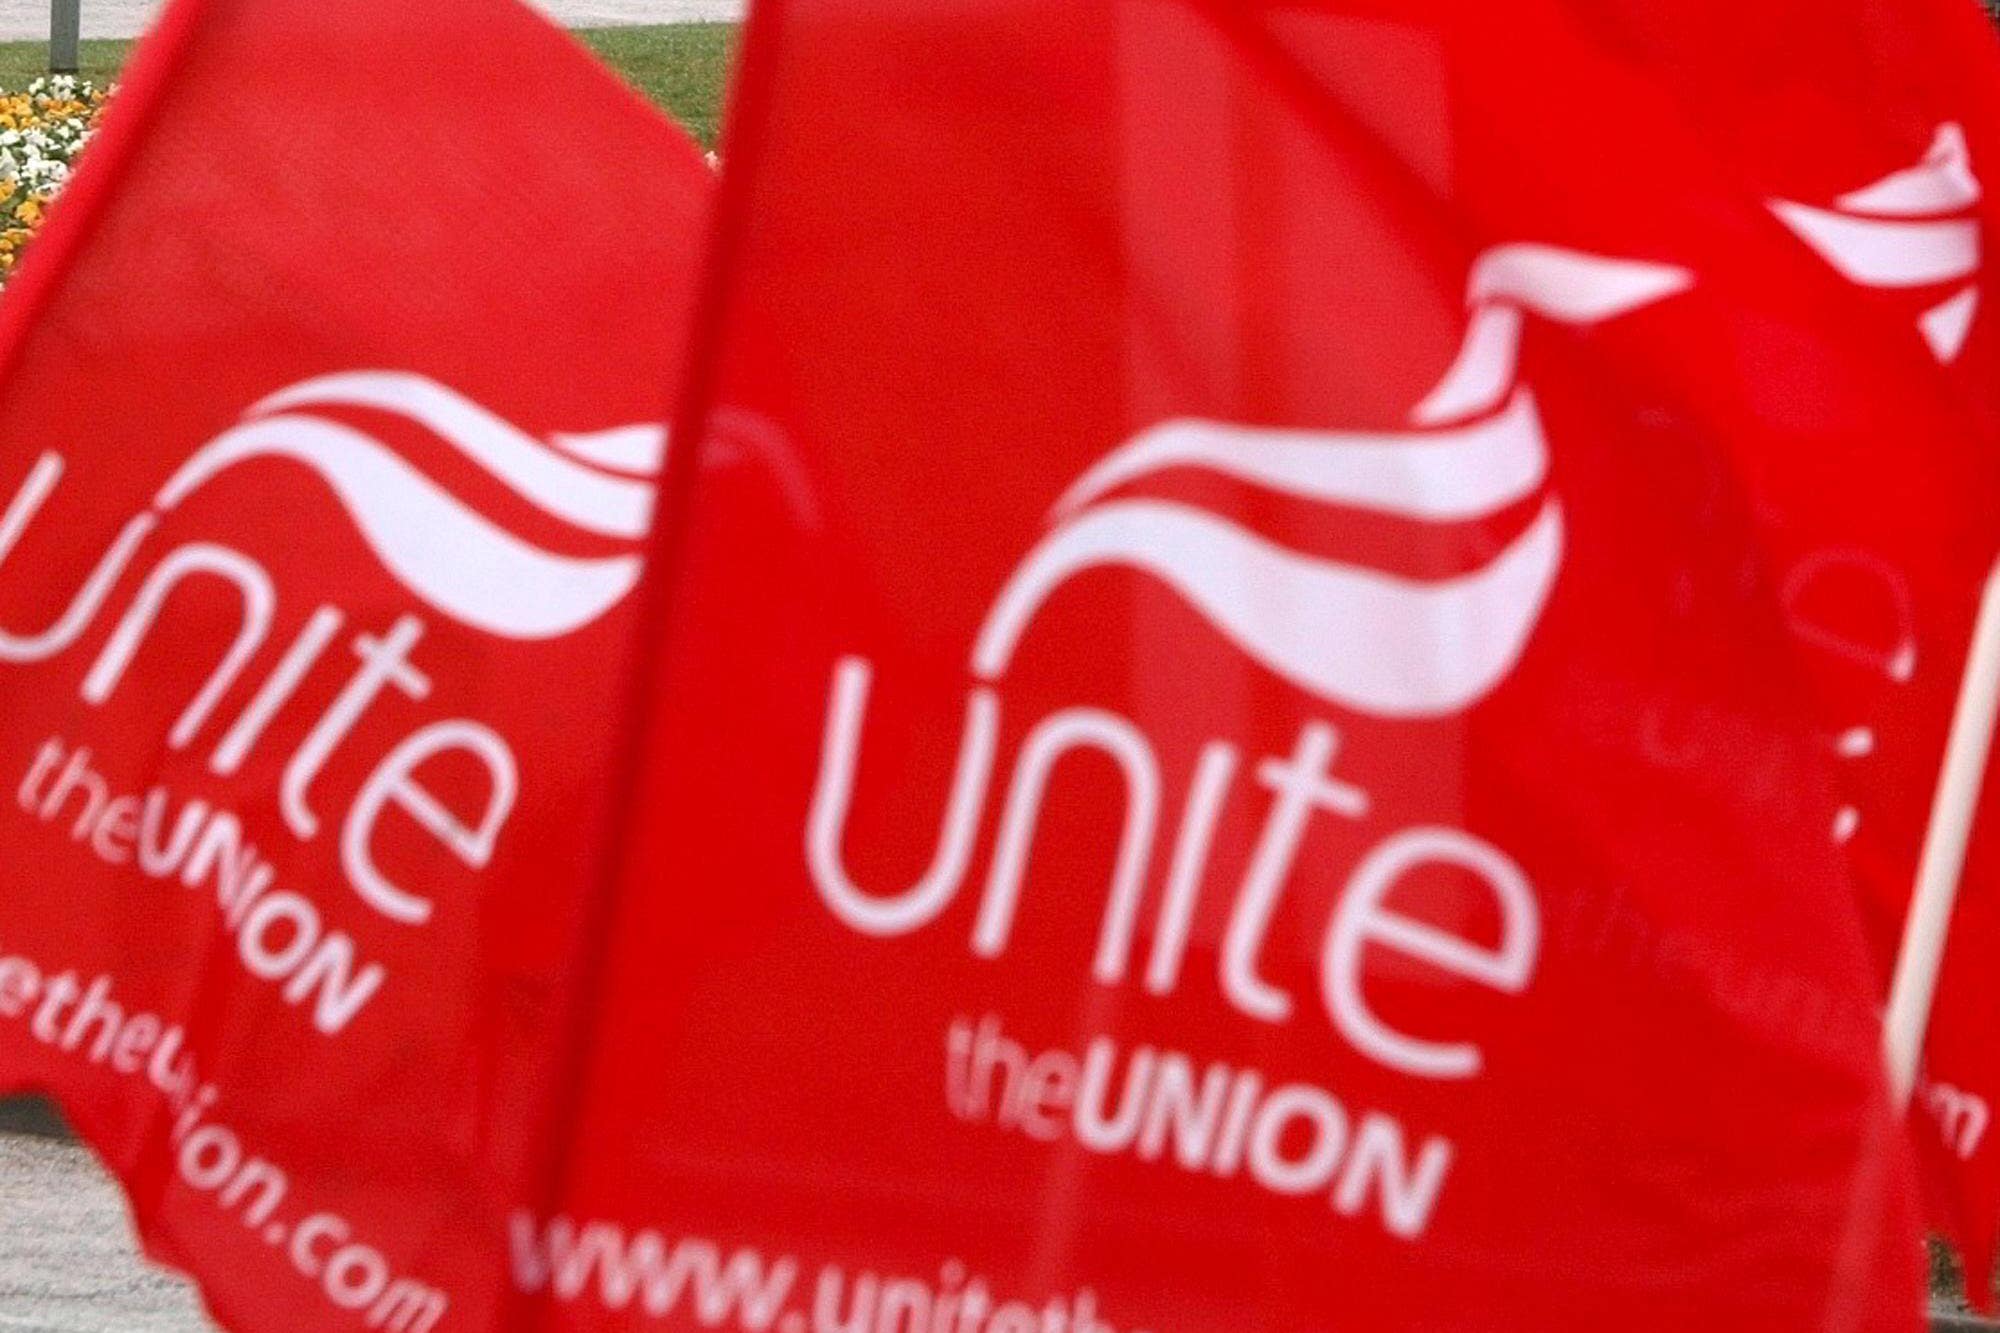 Members of the Unite Union have called off strike action on the railways (PA)